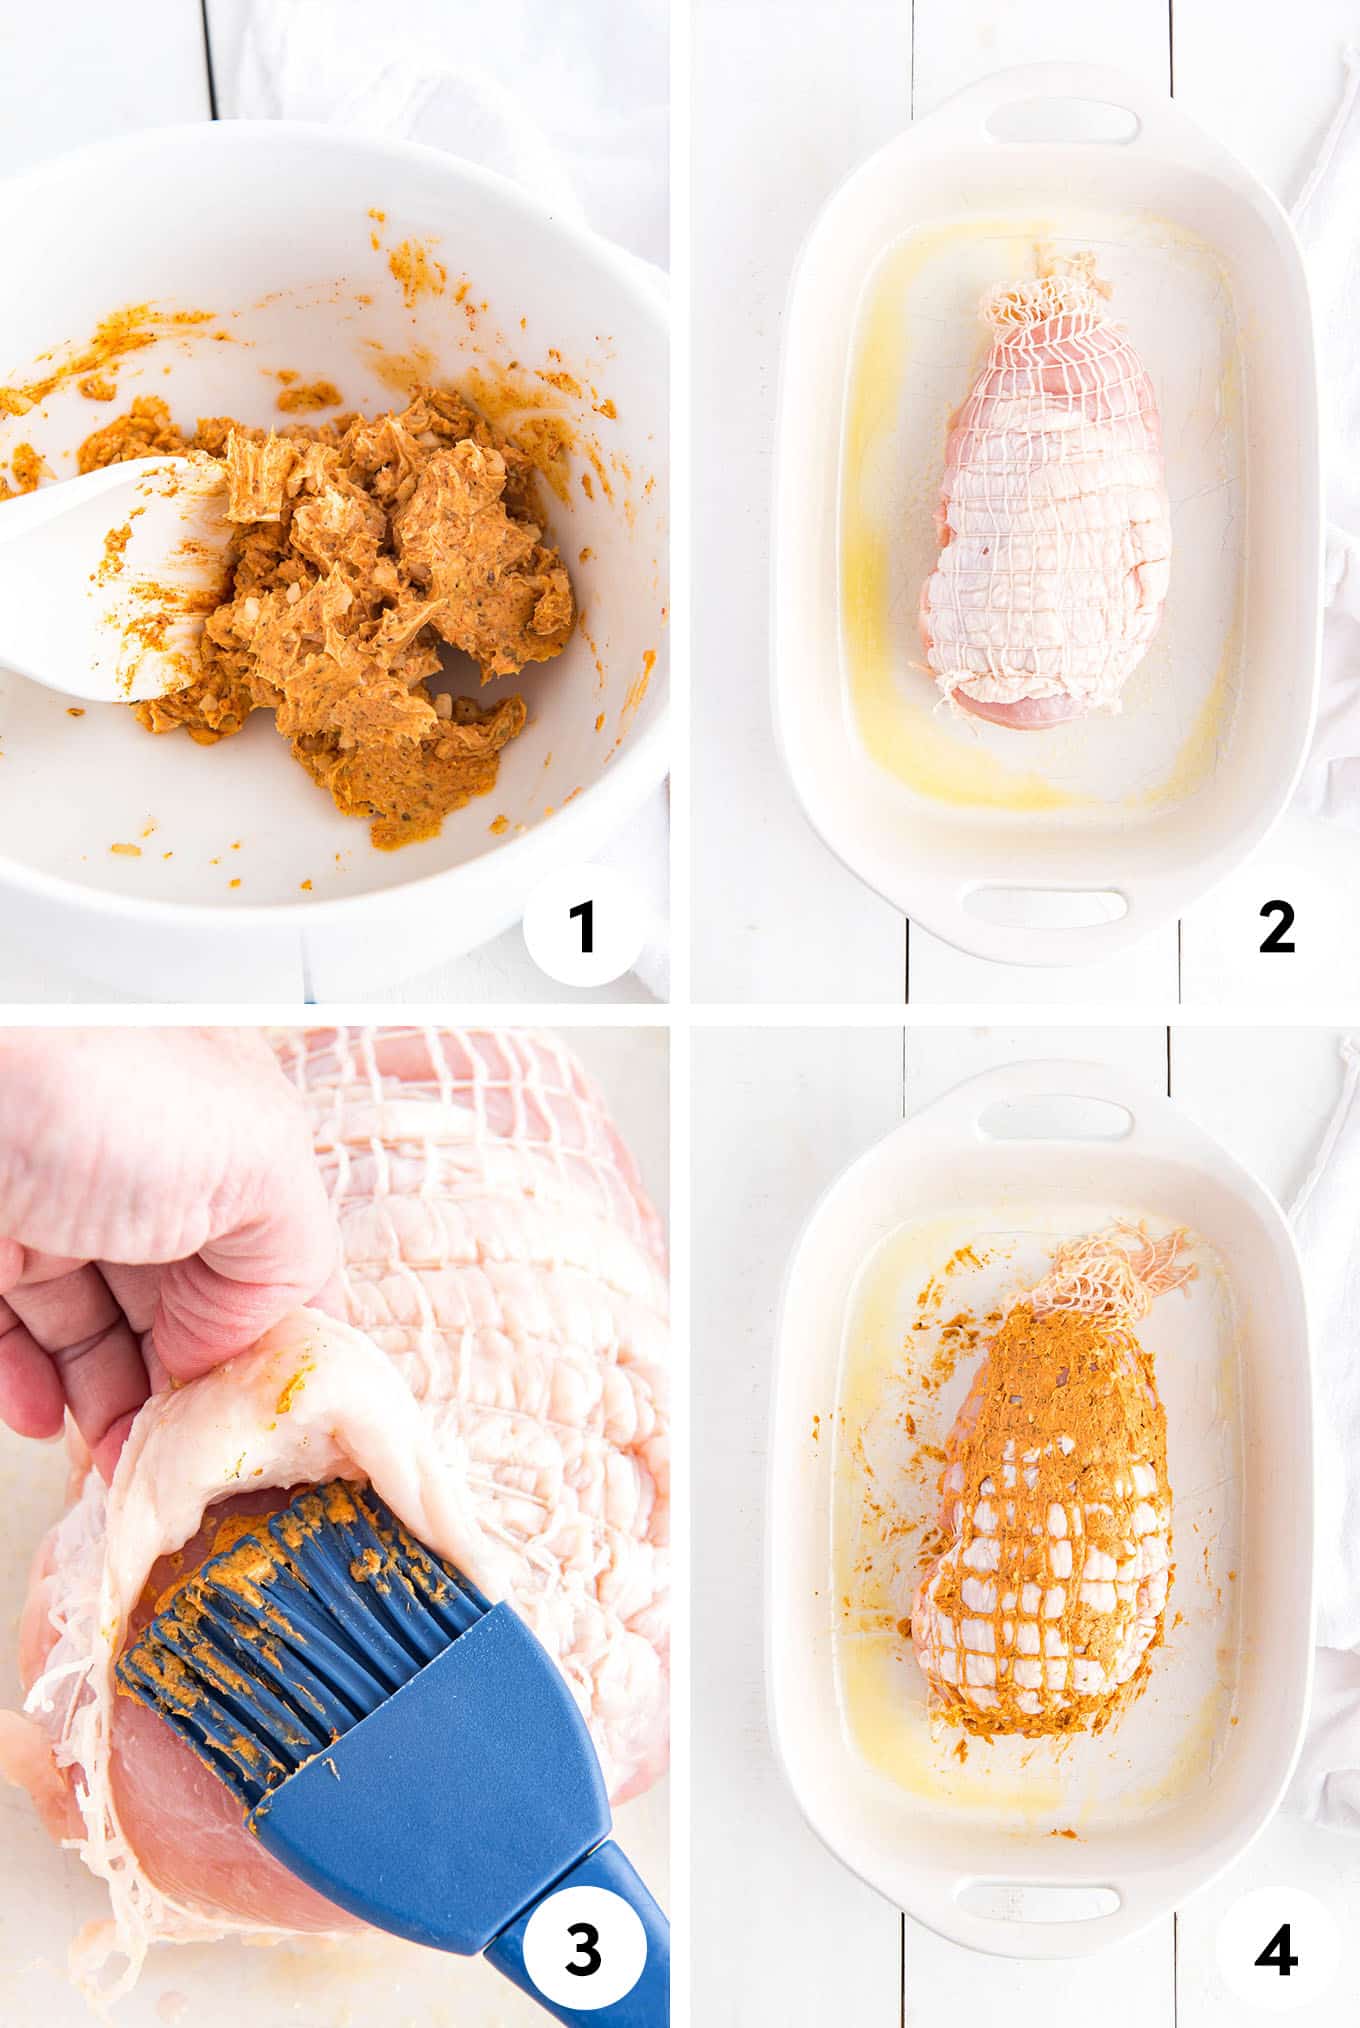 A collage of images showing the preparation of roasted turkey breast from making the butter rub, the turkey in the pan, brushing under the skin, and after it's all covered with butter mixture.